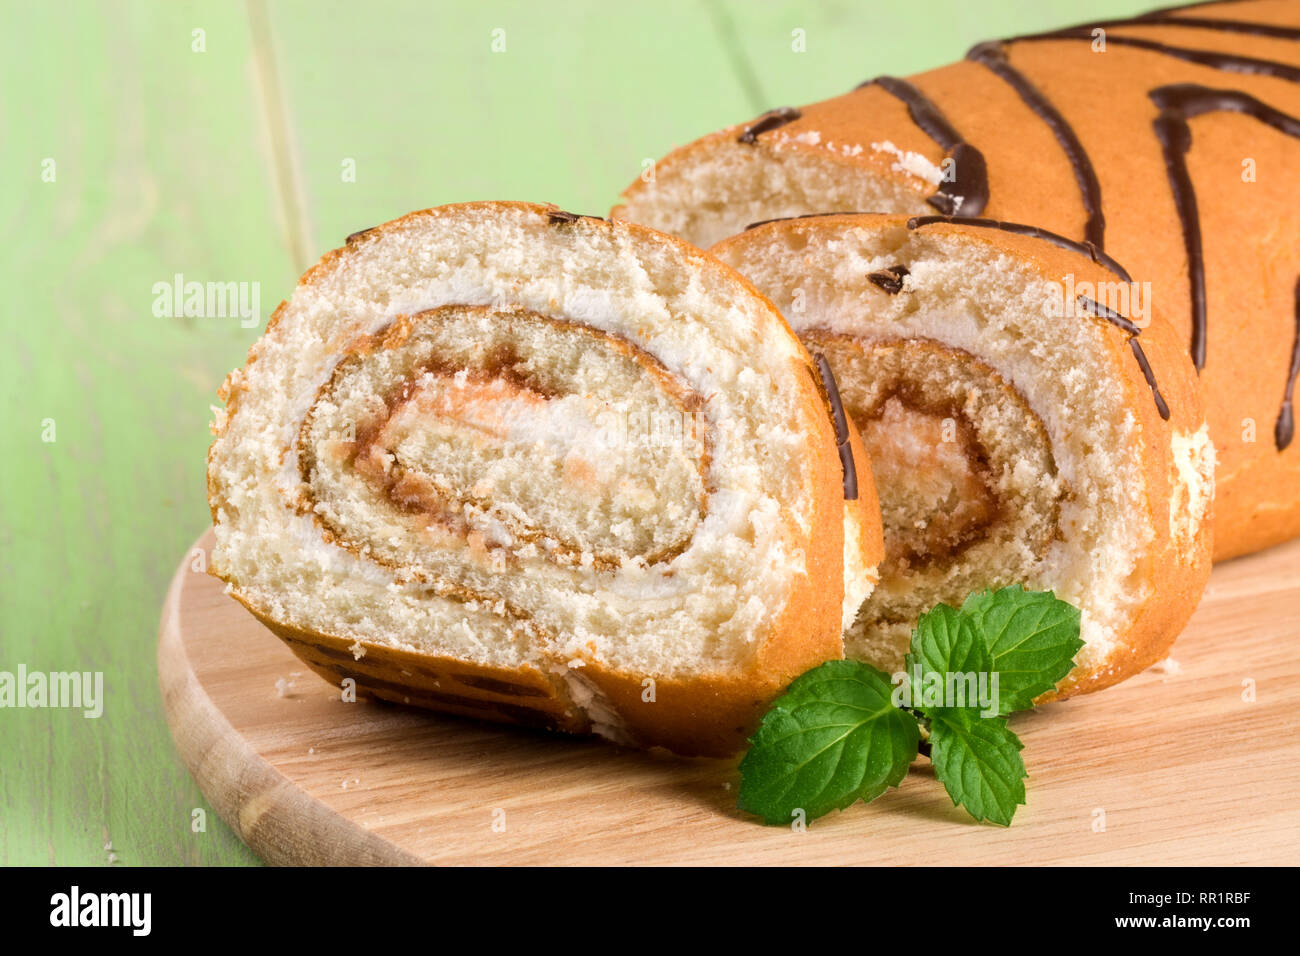 Biscuit swiss roll close-up on green wooden background Stock Photo